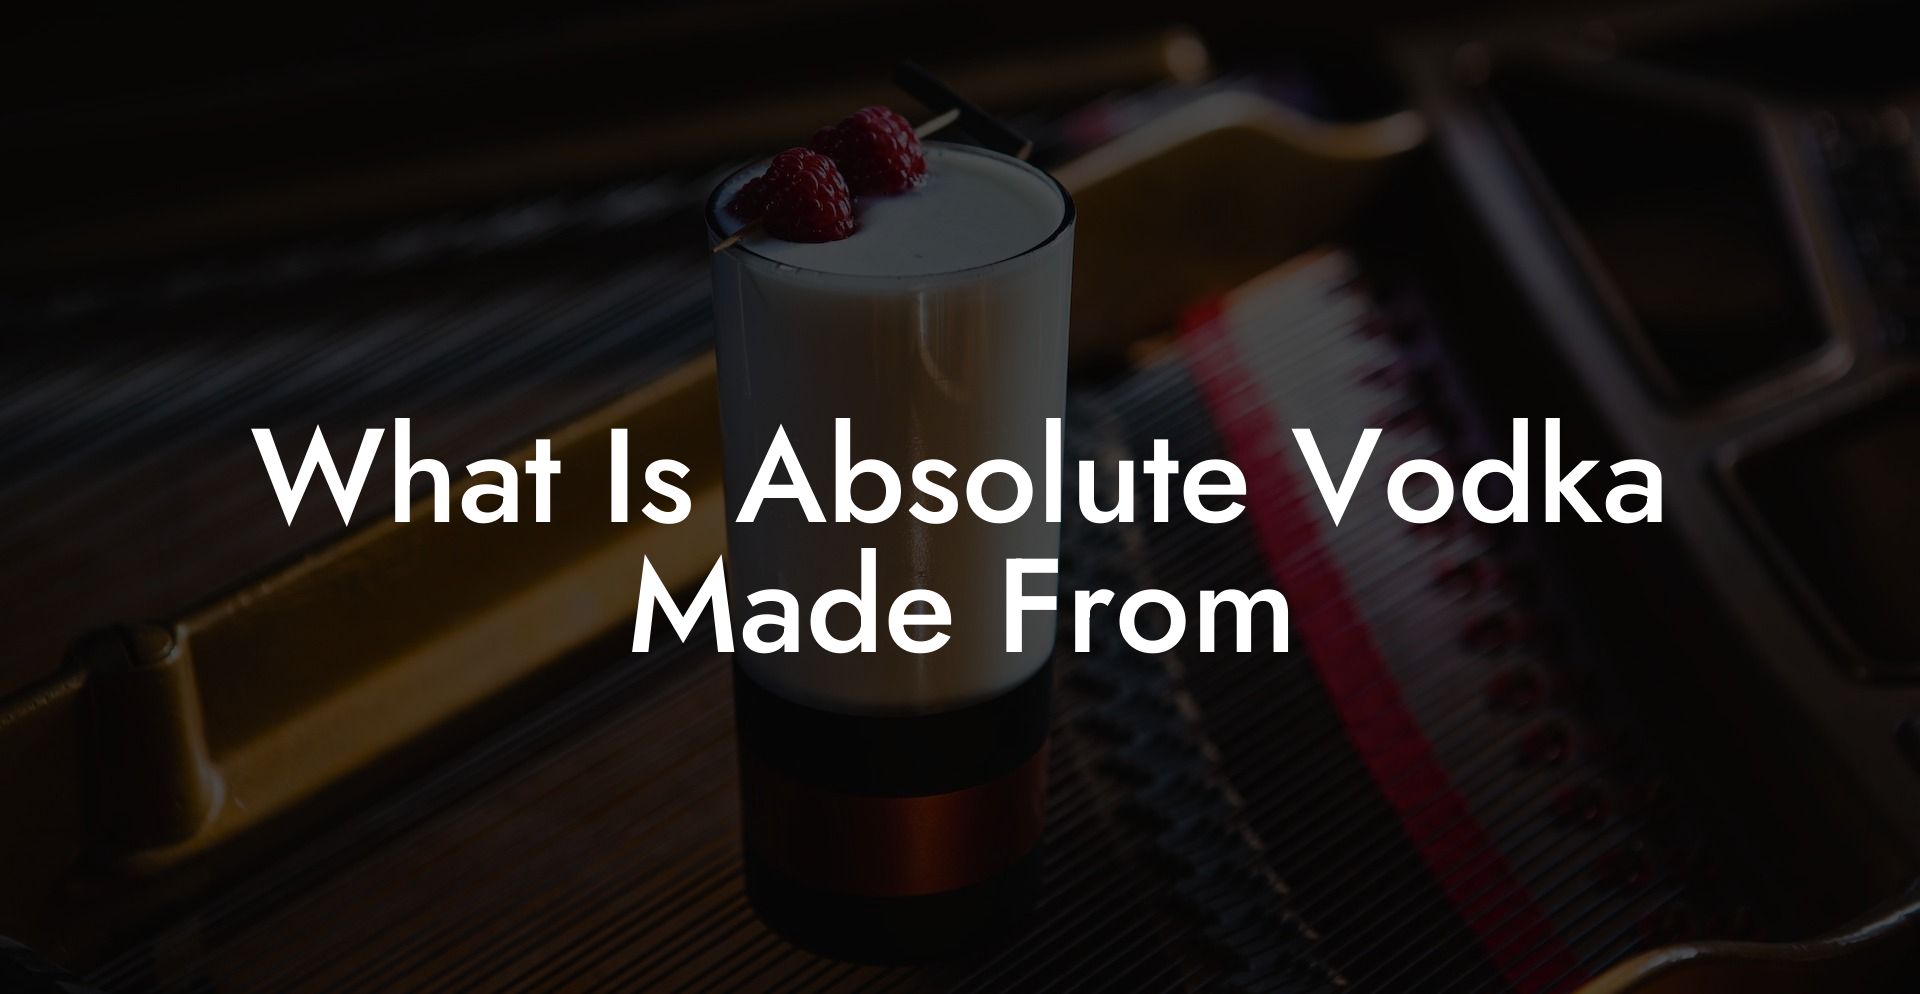 What Is Absolute Vodka Made From